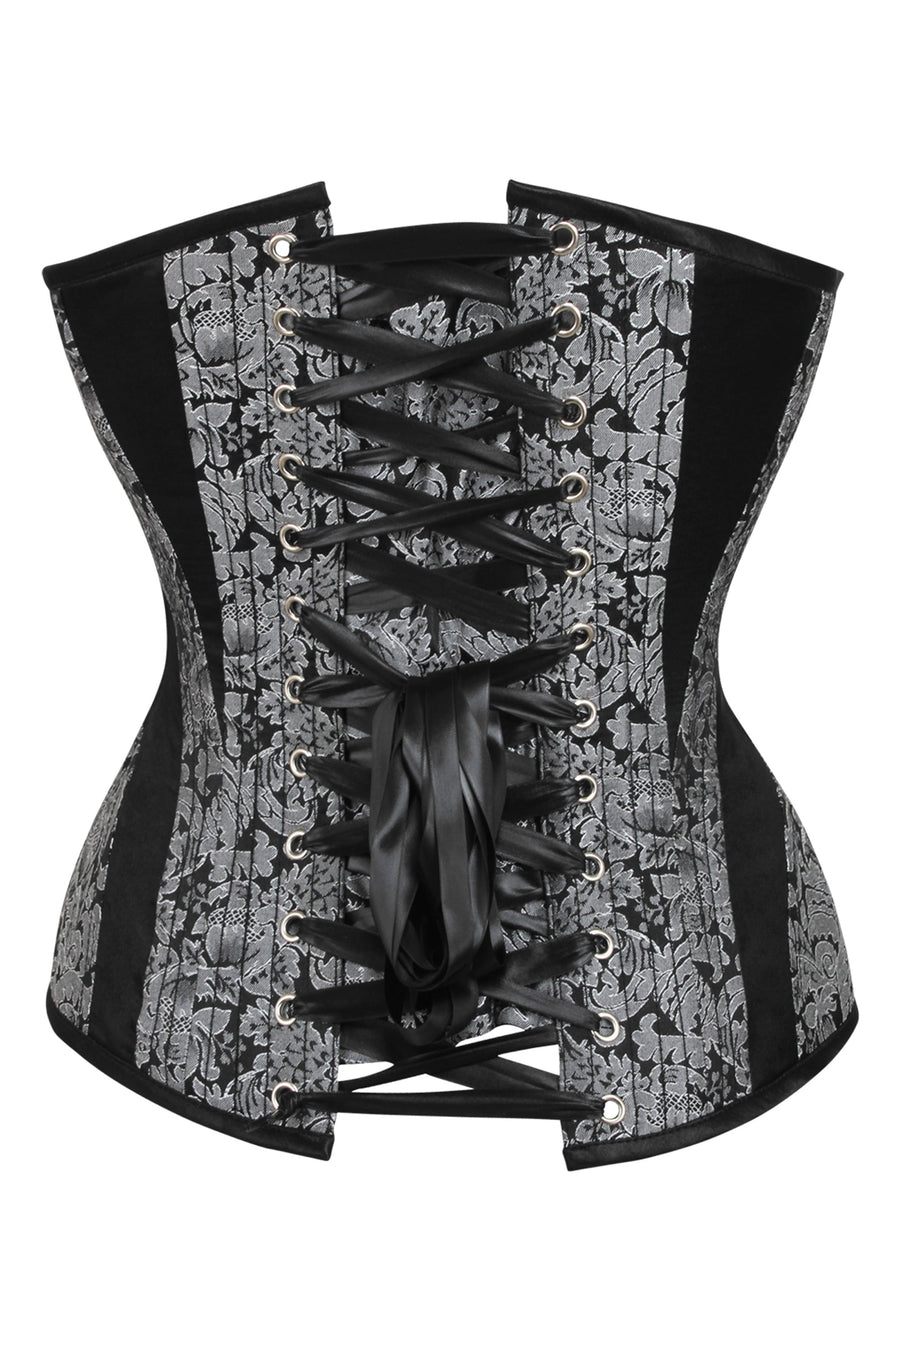 Sapubonv Corsets and Bustiers Shapewear Brocade Lingerie Overbust